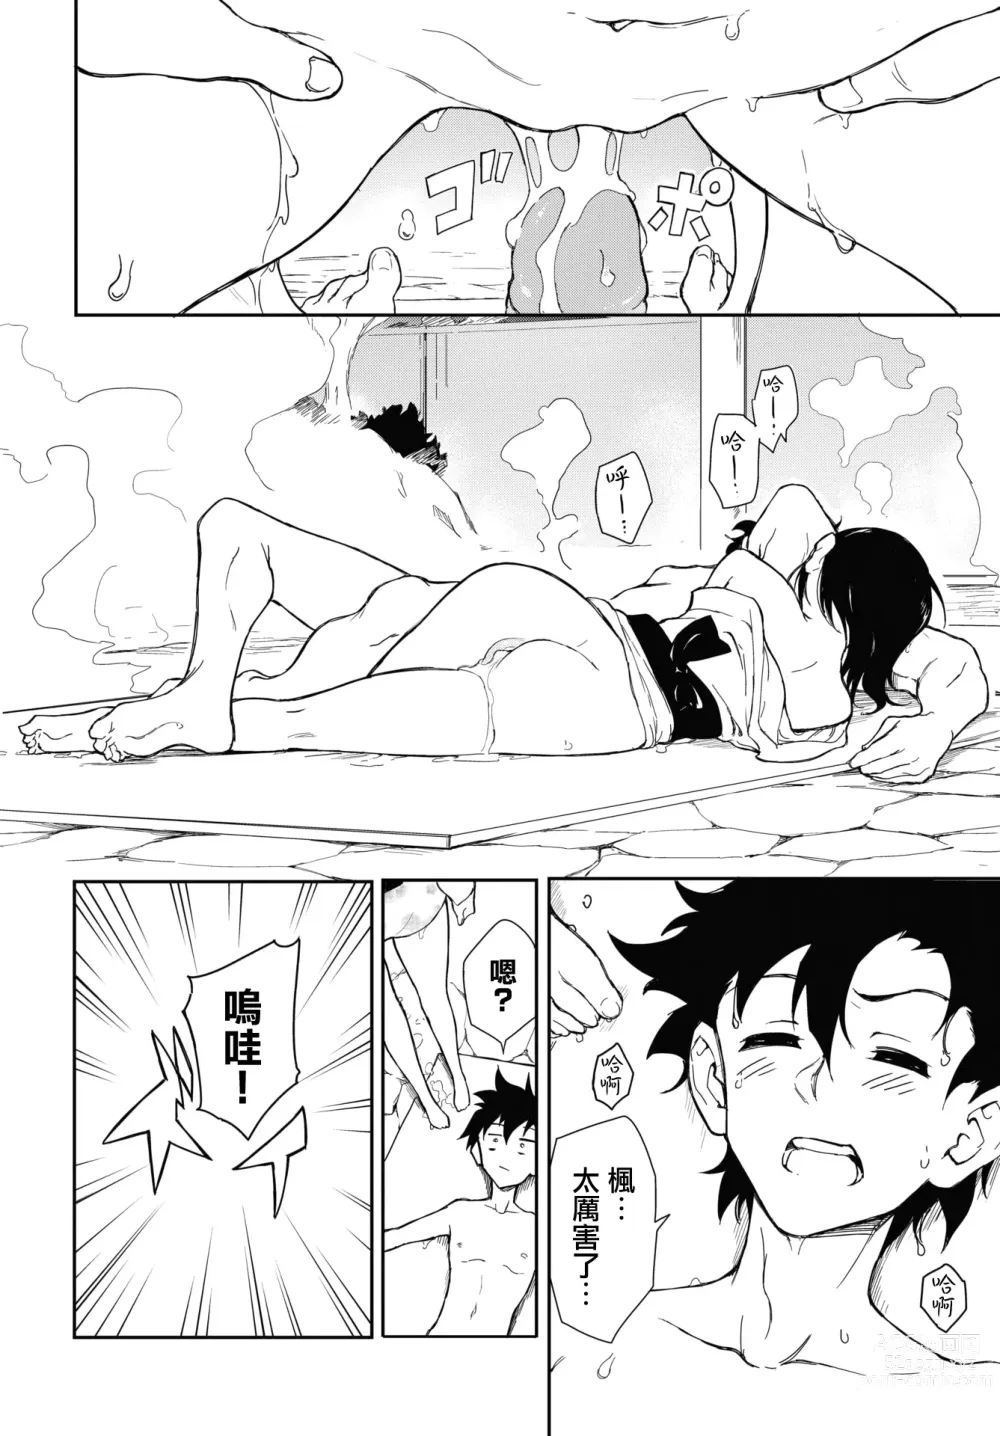 Page 175 of doujinshi 楓と鈴 1-7